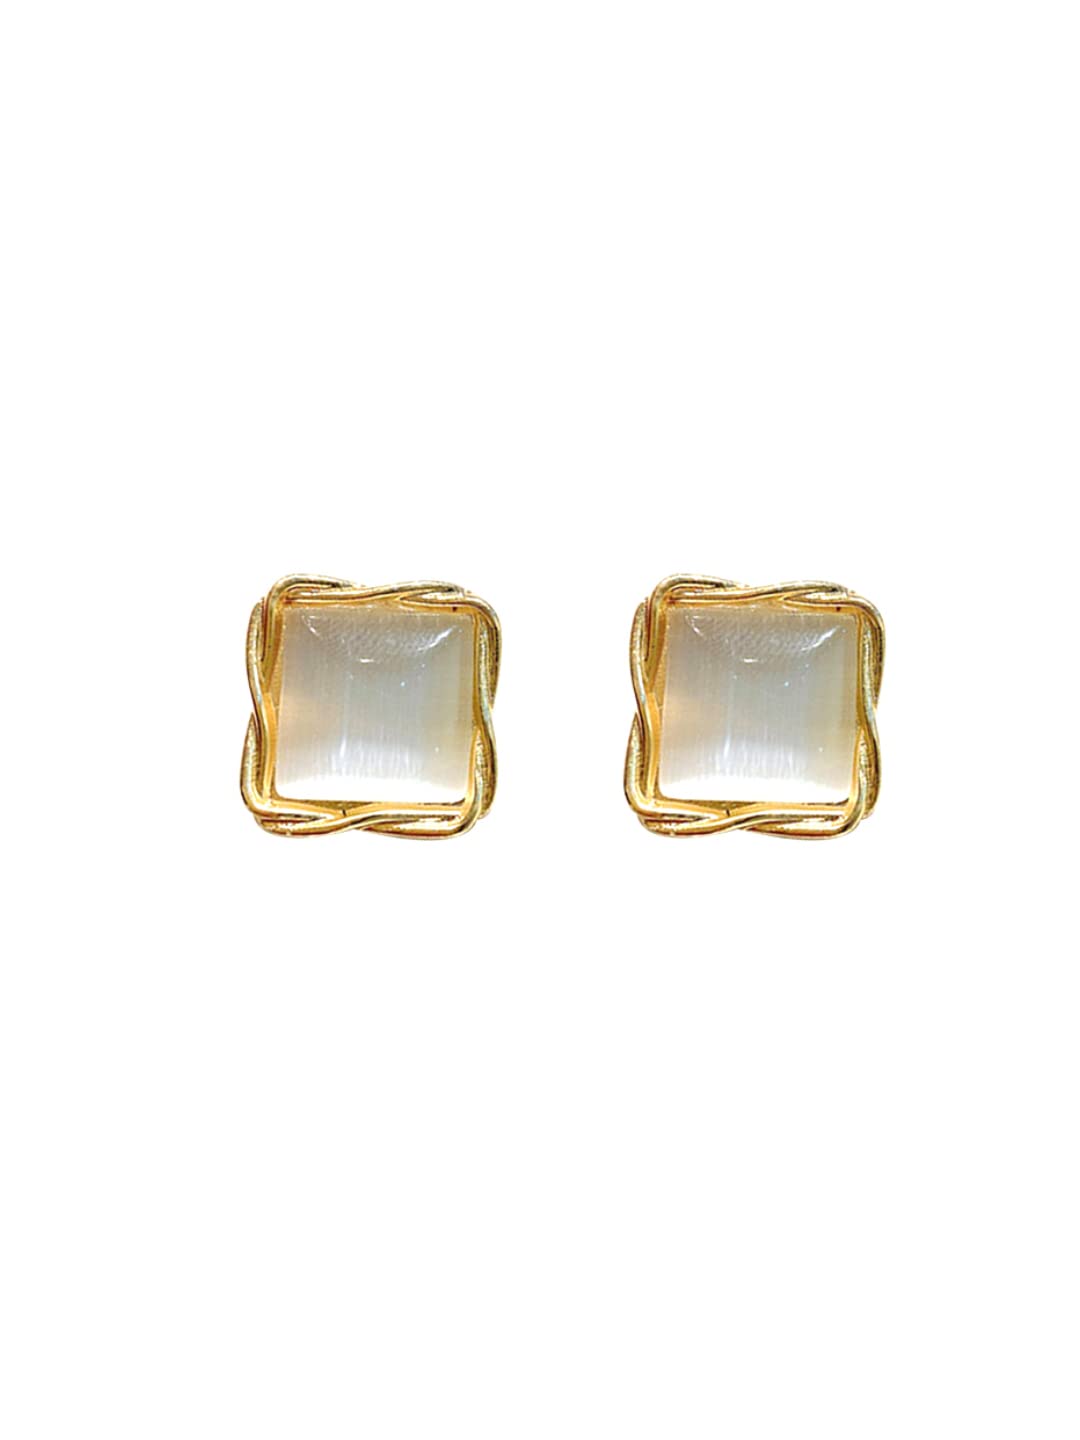 Yellow Chimes Earrings for Women and Girls Studs for Girls | Gold Tone Square Opal Stud Earrings | Birthday Gift for girls and women Anniversary Gift for Wife